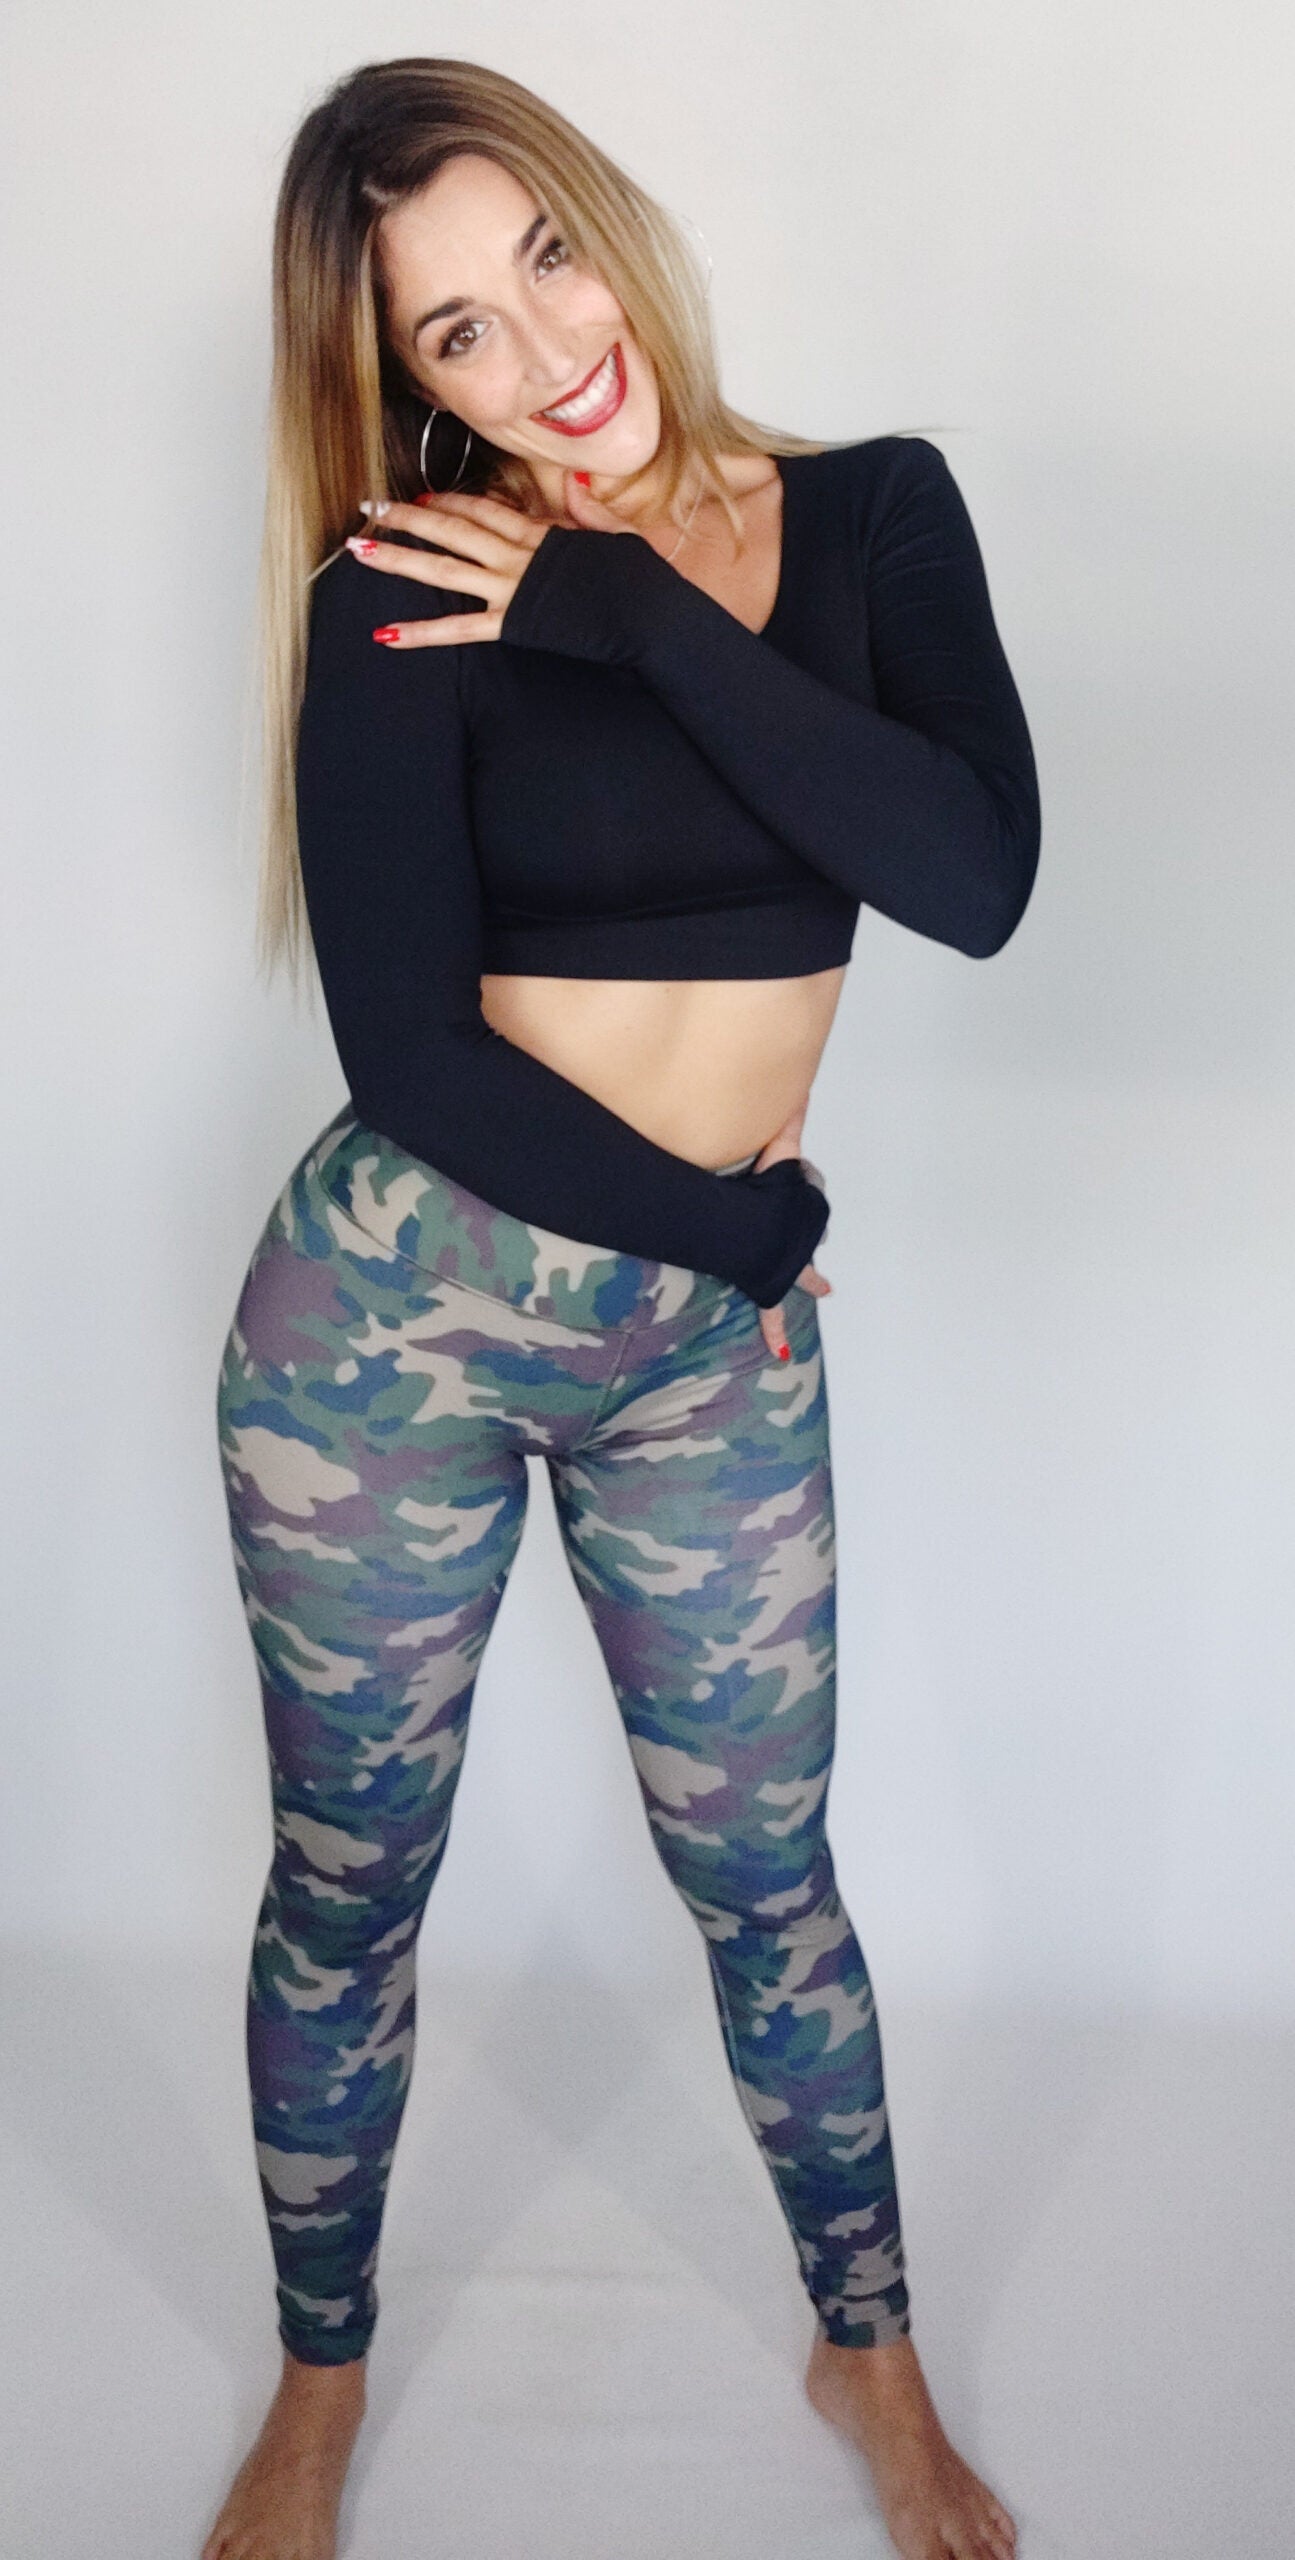 Only S and M - Camo Legging